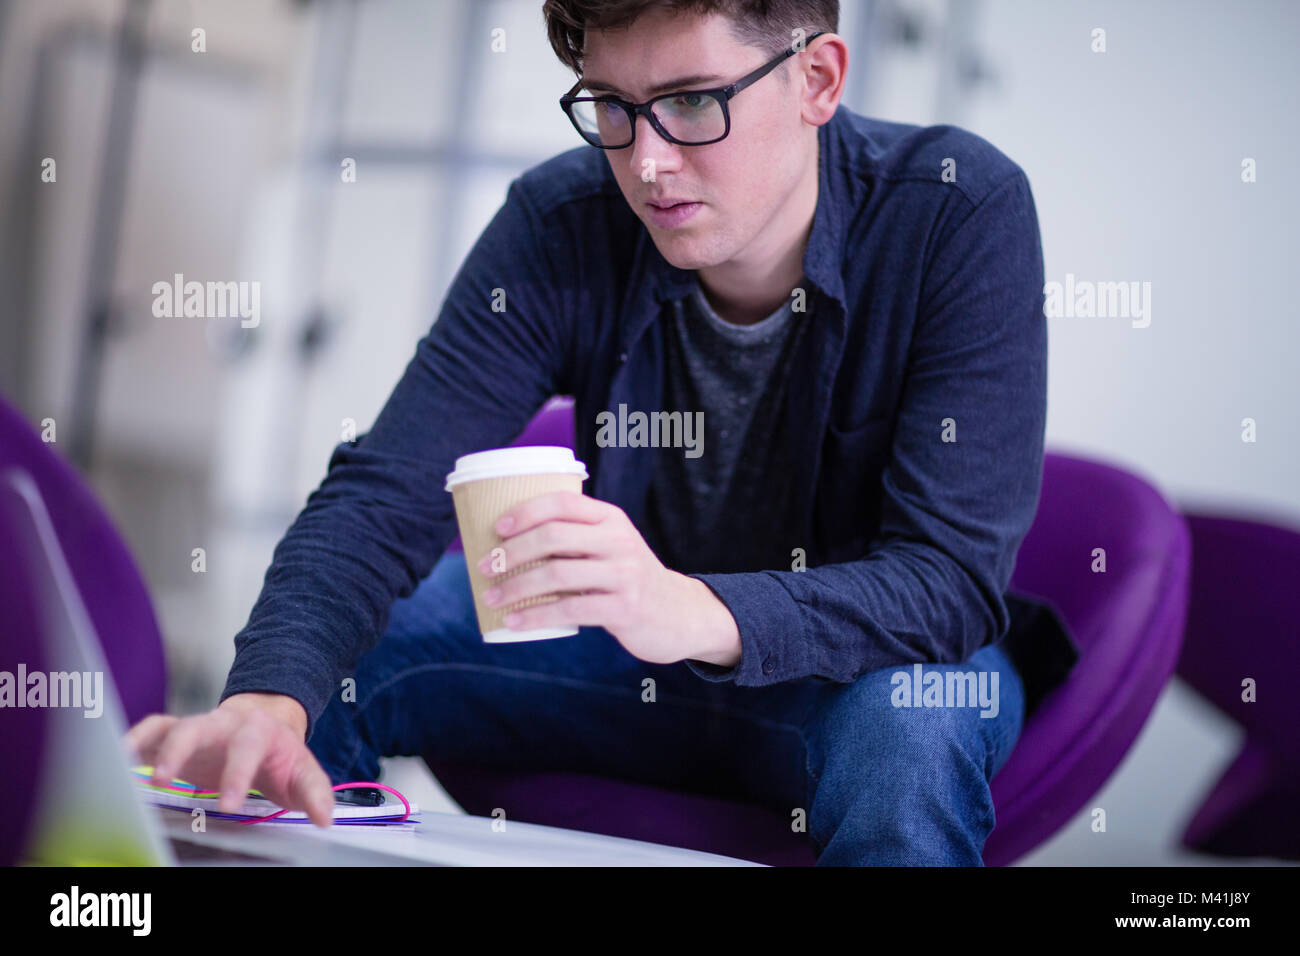 Student working on a laptop at college Stock Photo